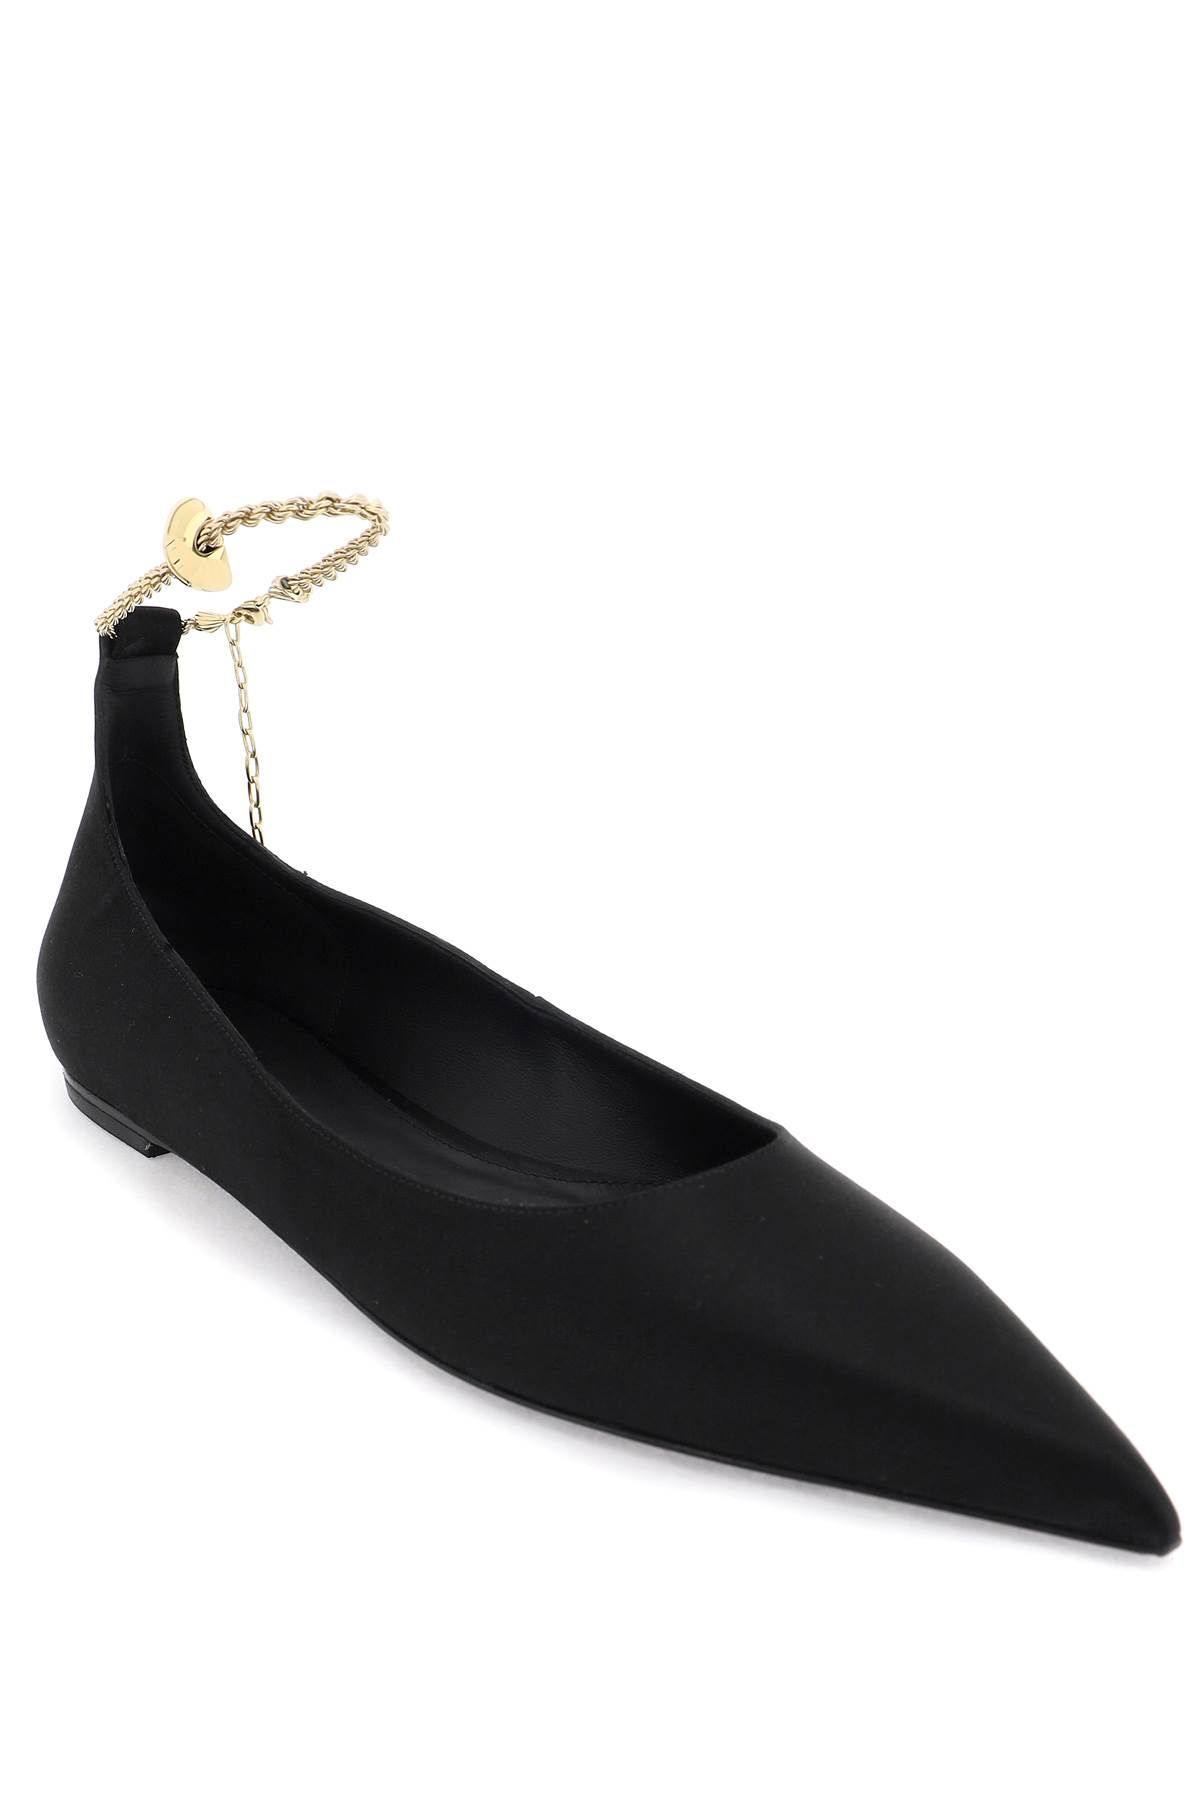 Shop Ferragamo Ballet Flats With Ankle Chain In Black